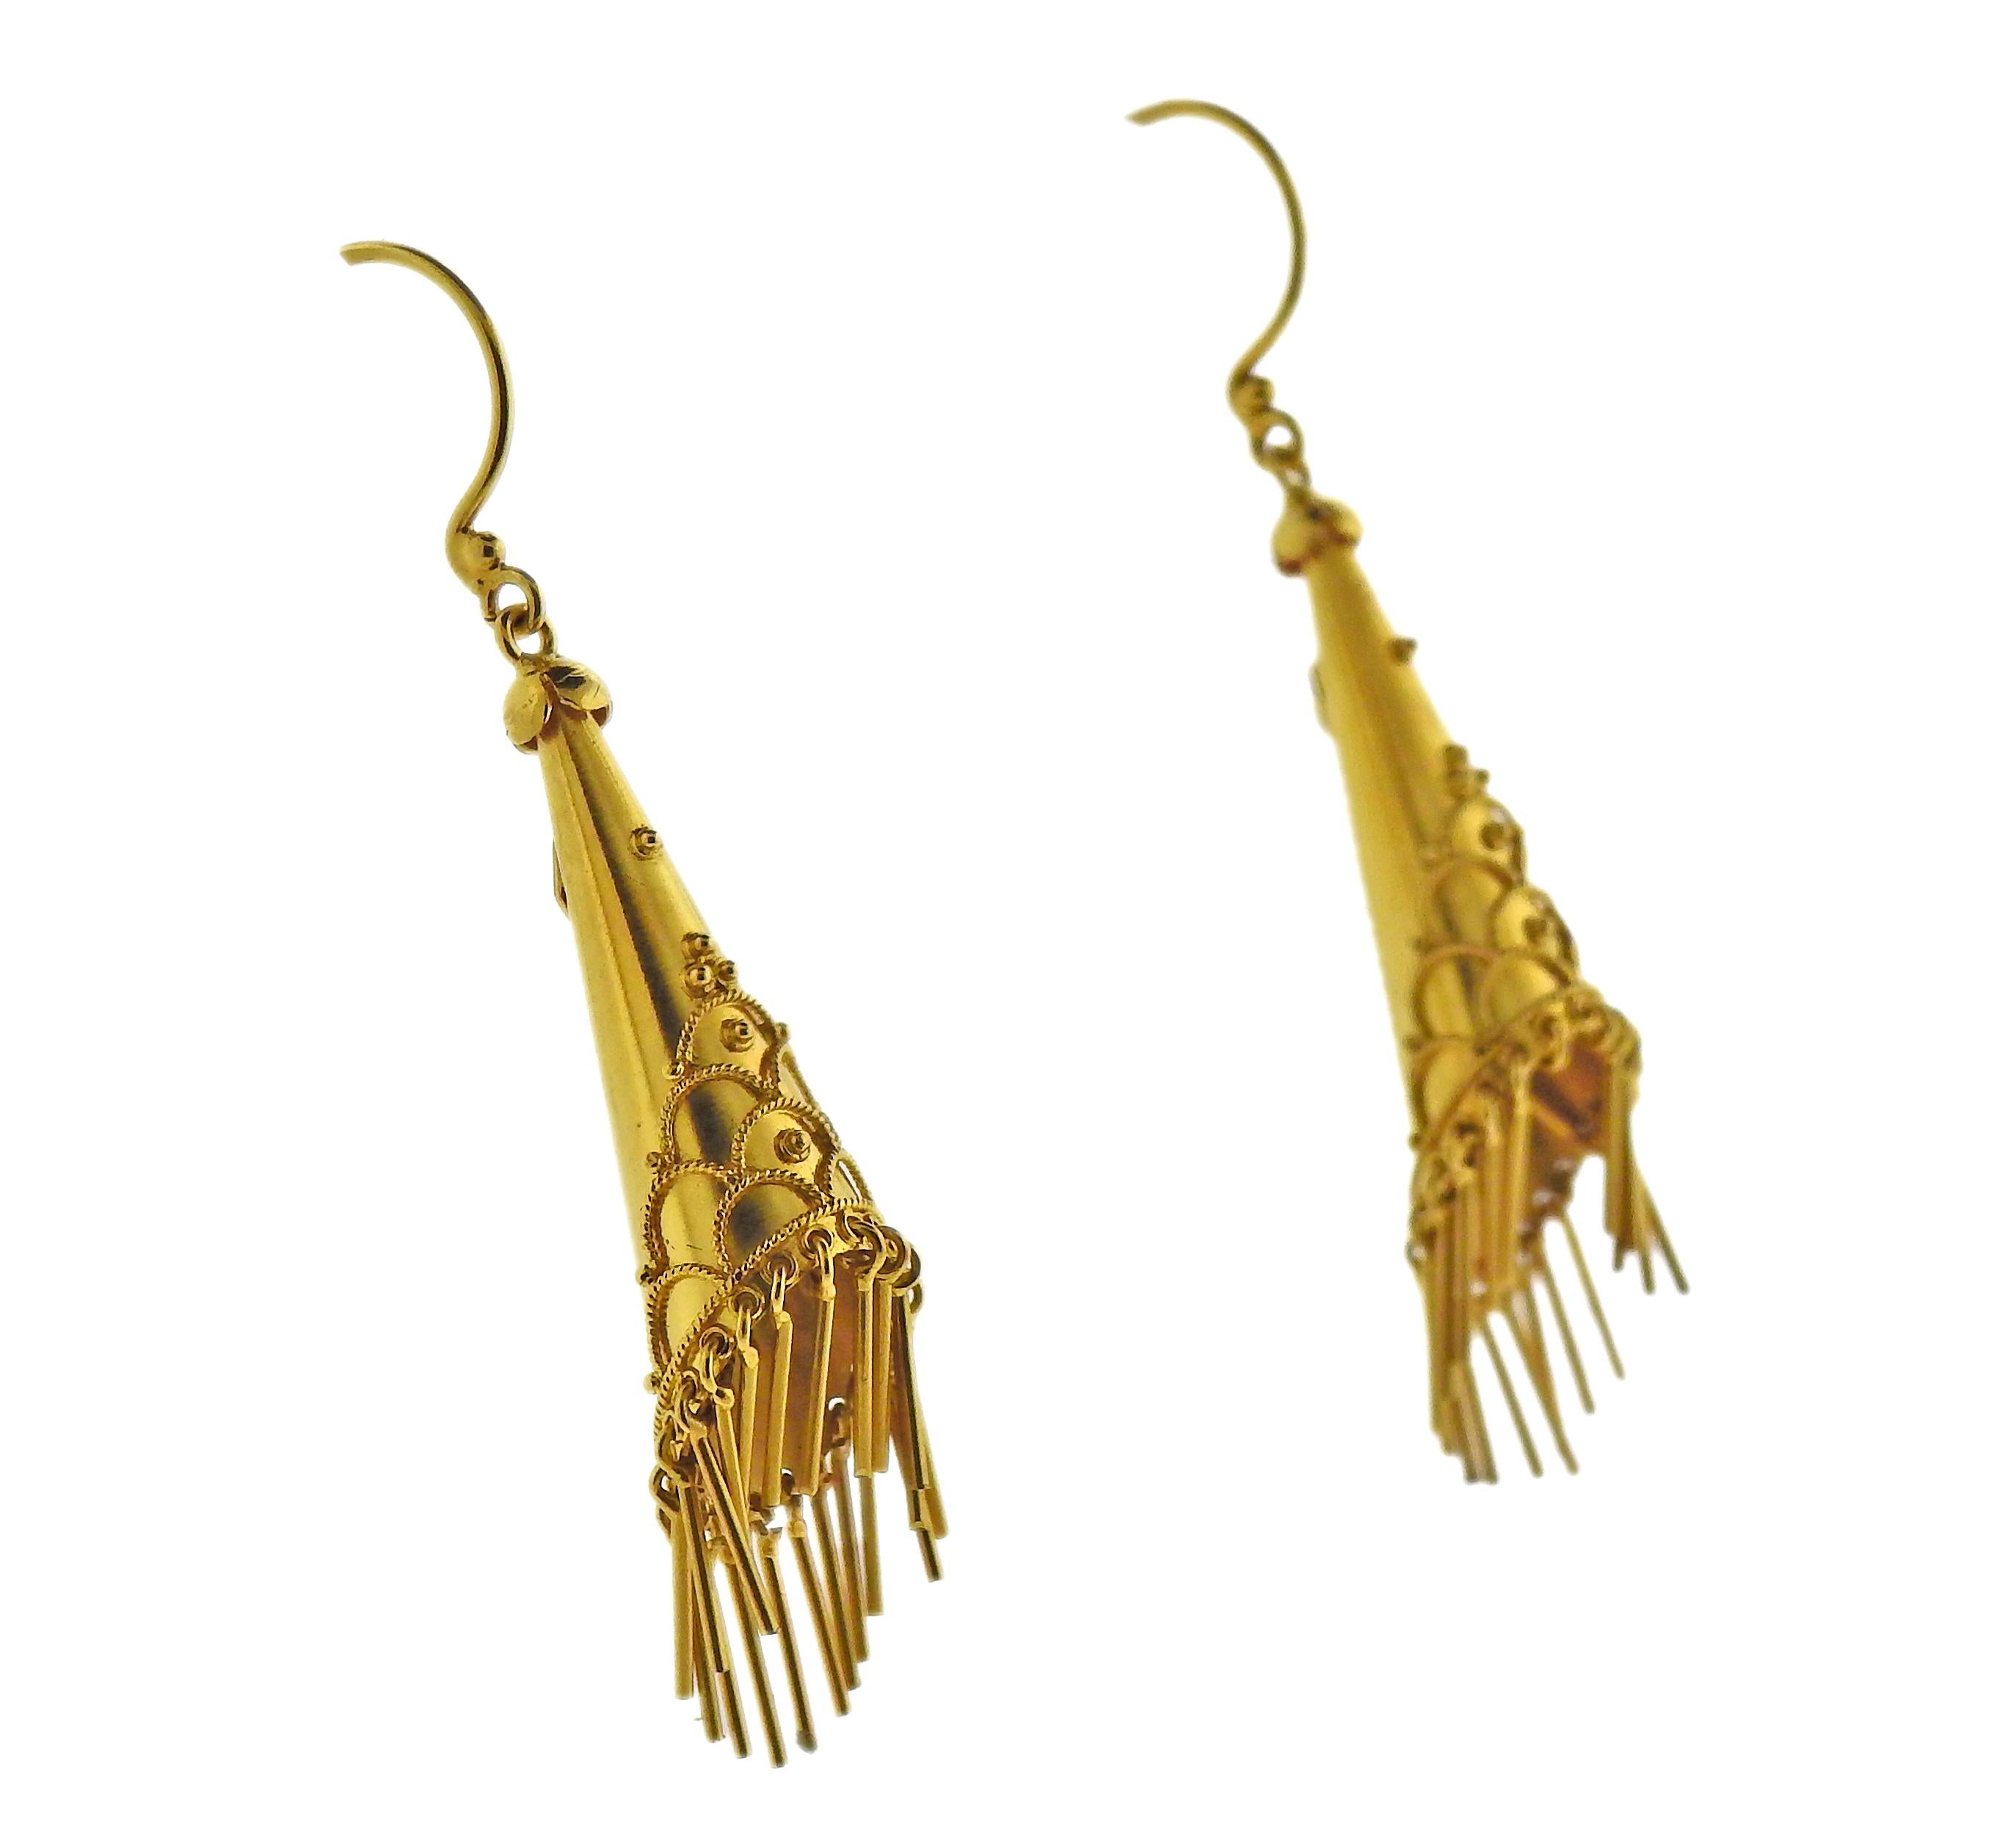 Pair of 15k gold tassel drop earrings by Castellani. Earrings are 50mm long. Marked with CC mark. Weight - 5.2 grams.